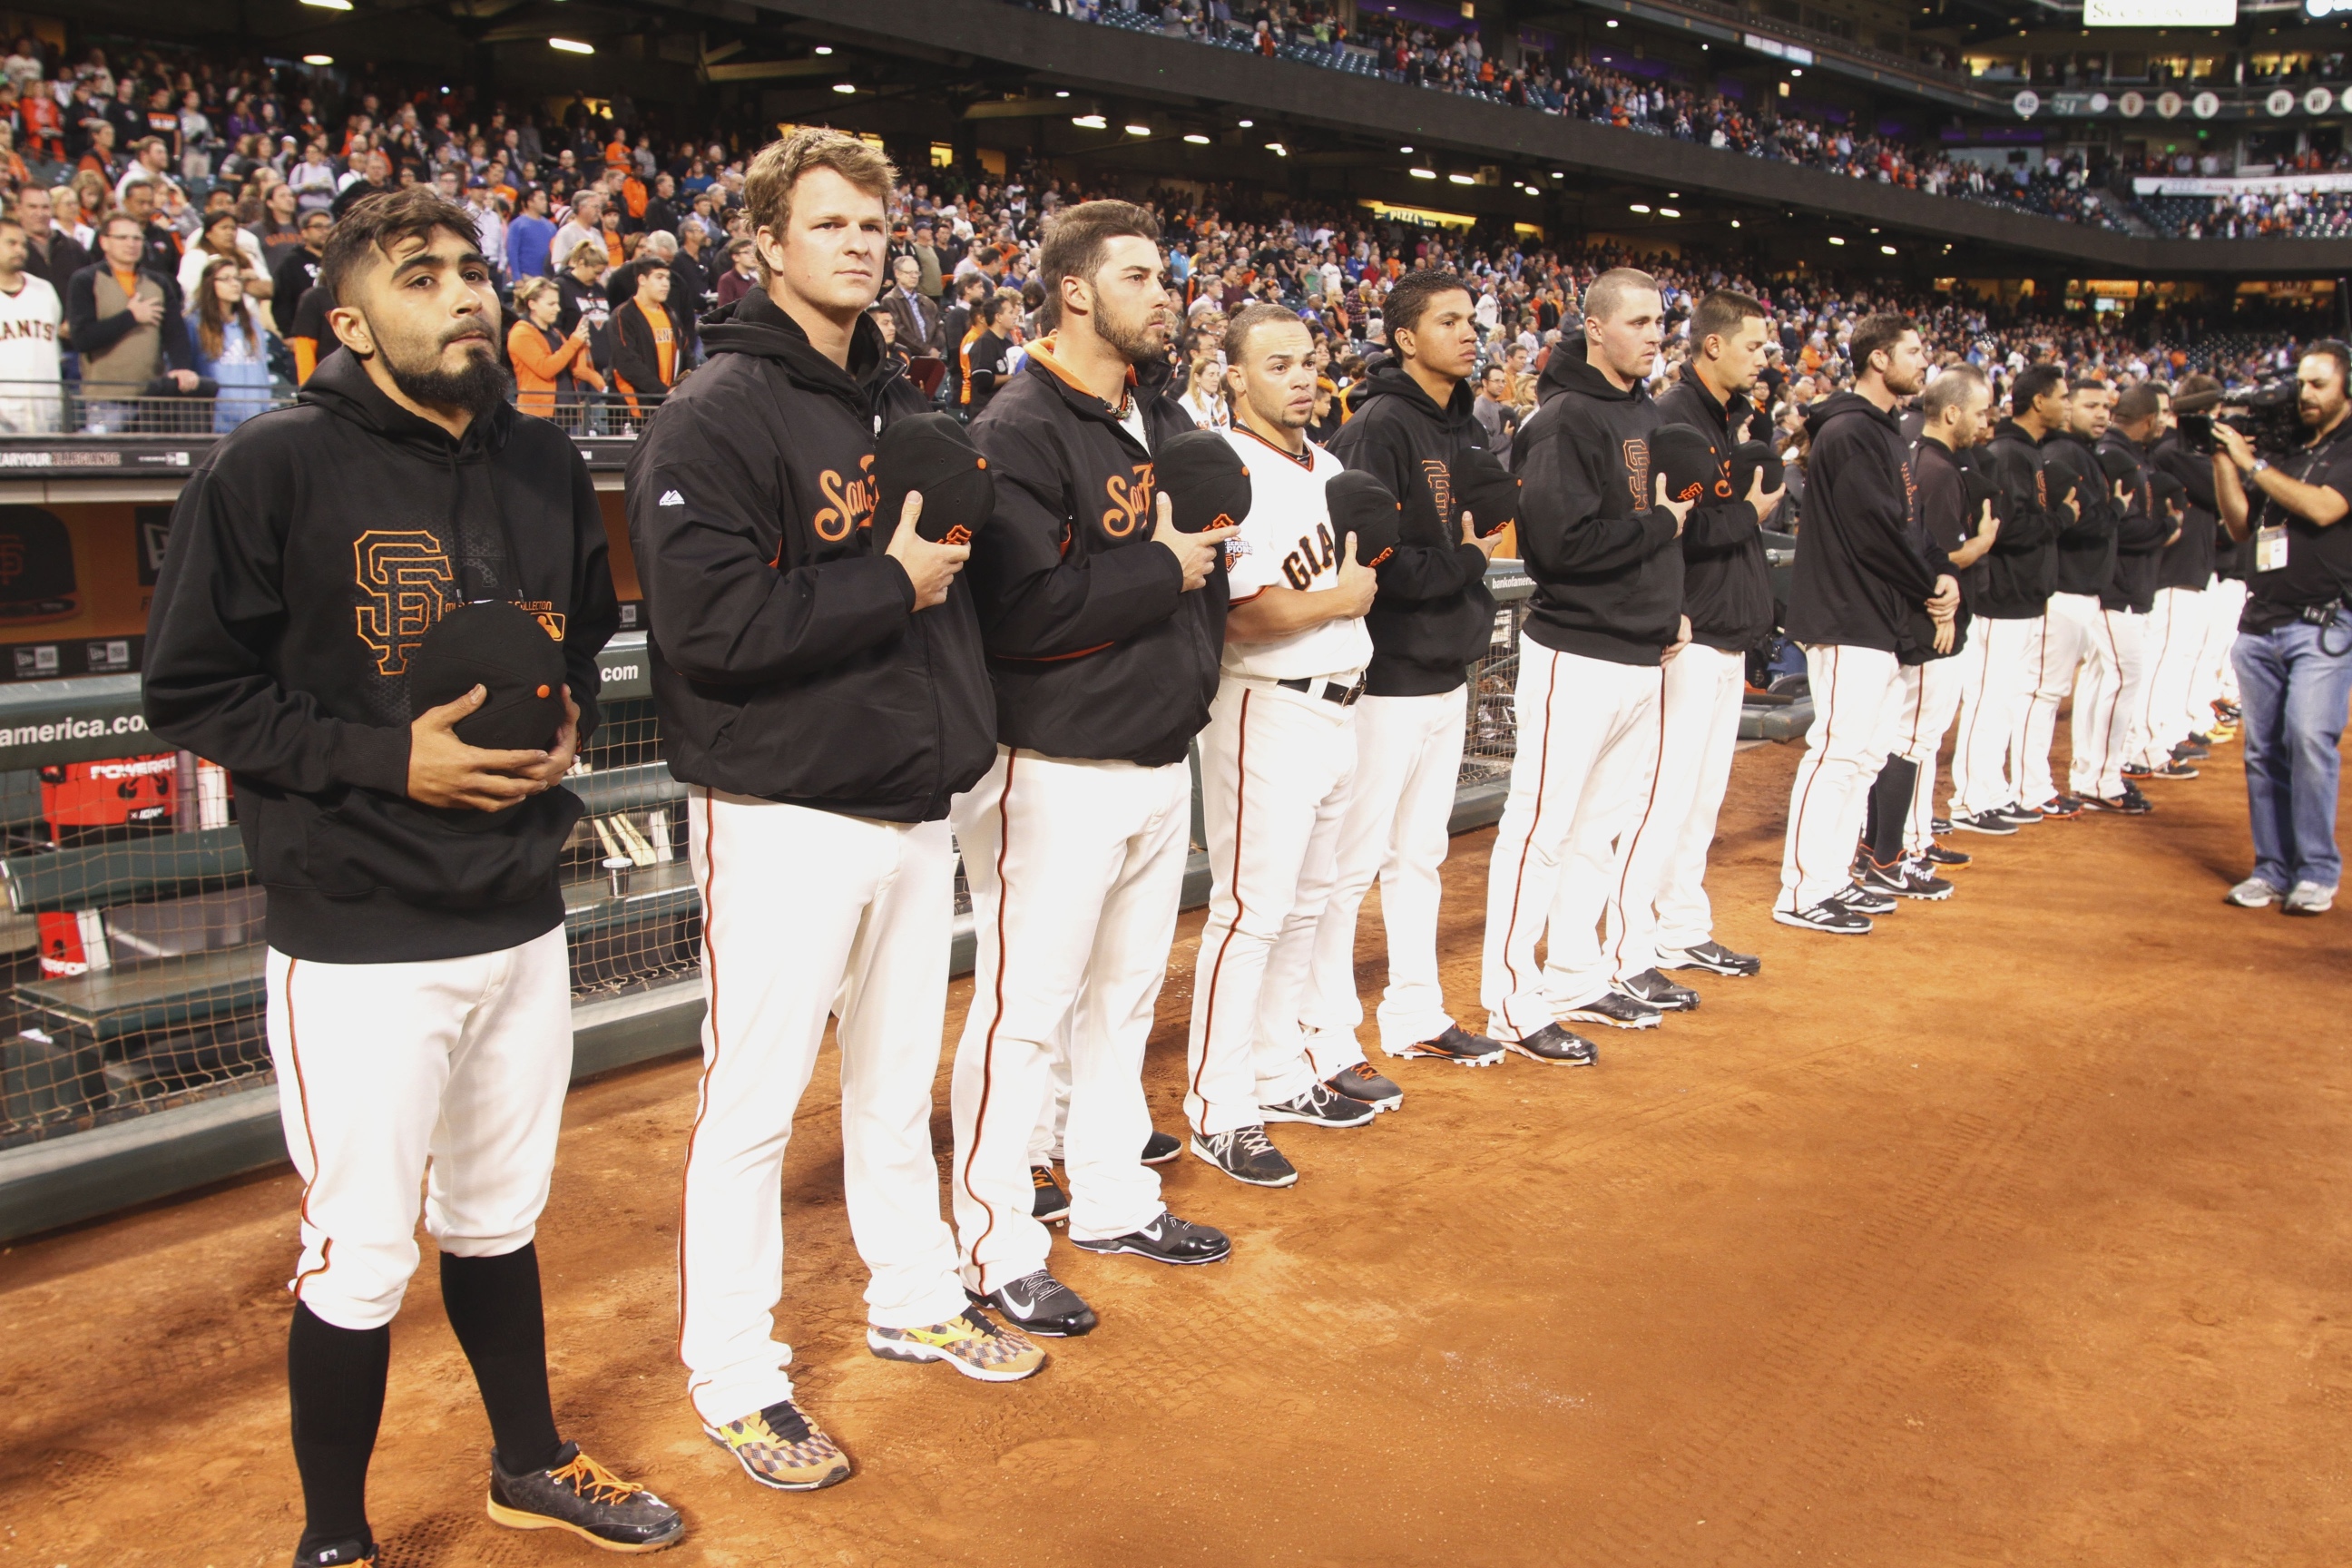 San Francisco Giants observe a moment of silence in San Francisco in memory of the man fatally stabbed after a Dodgers-Giants game. Photo: AP